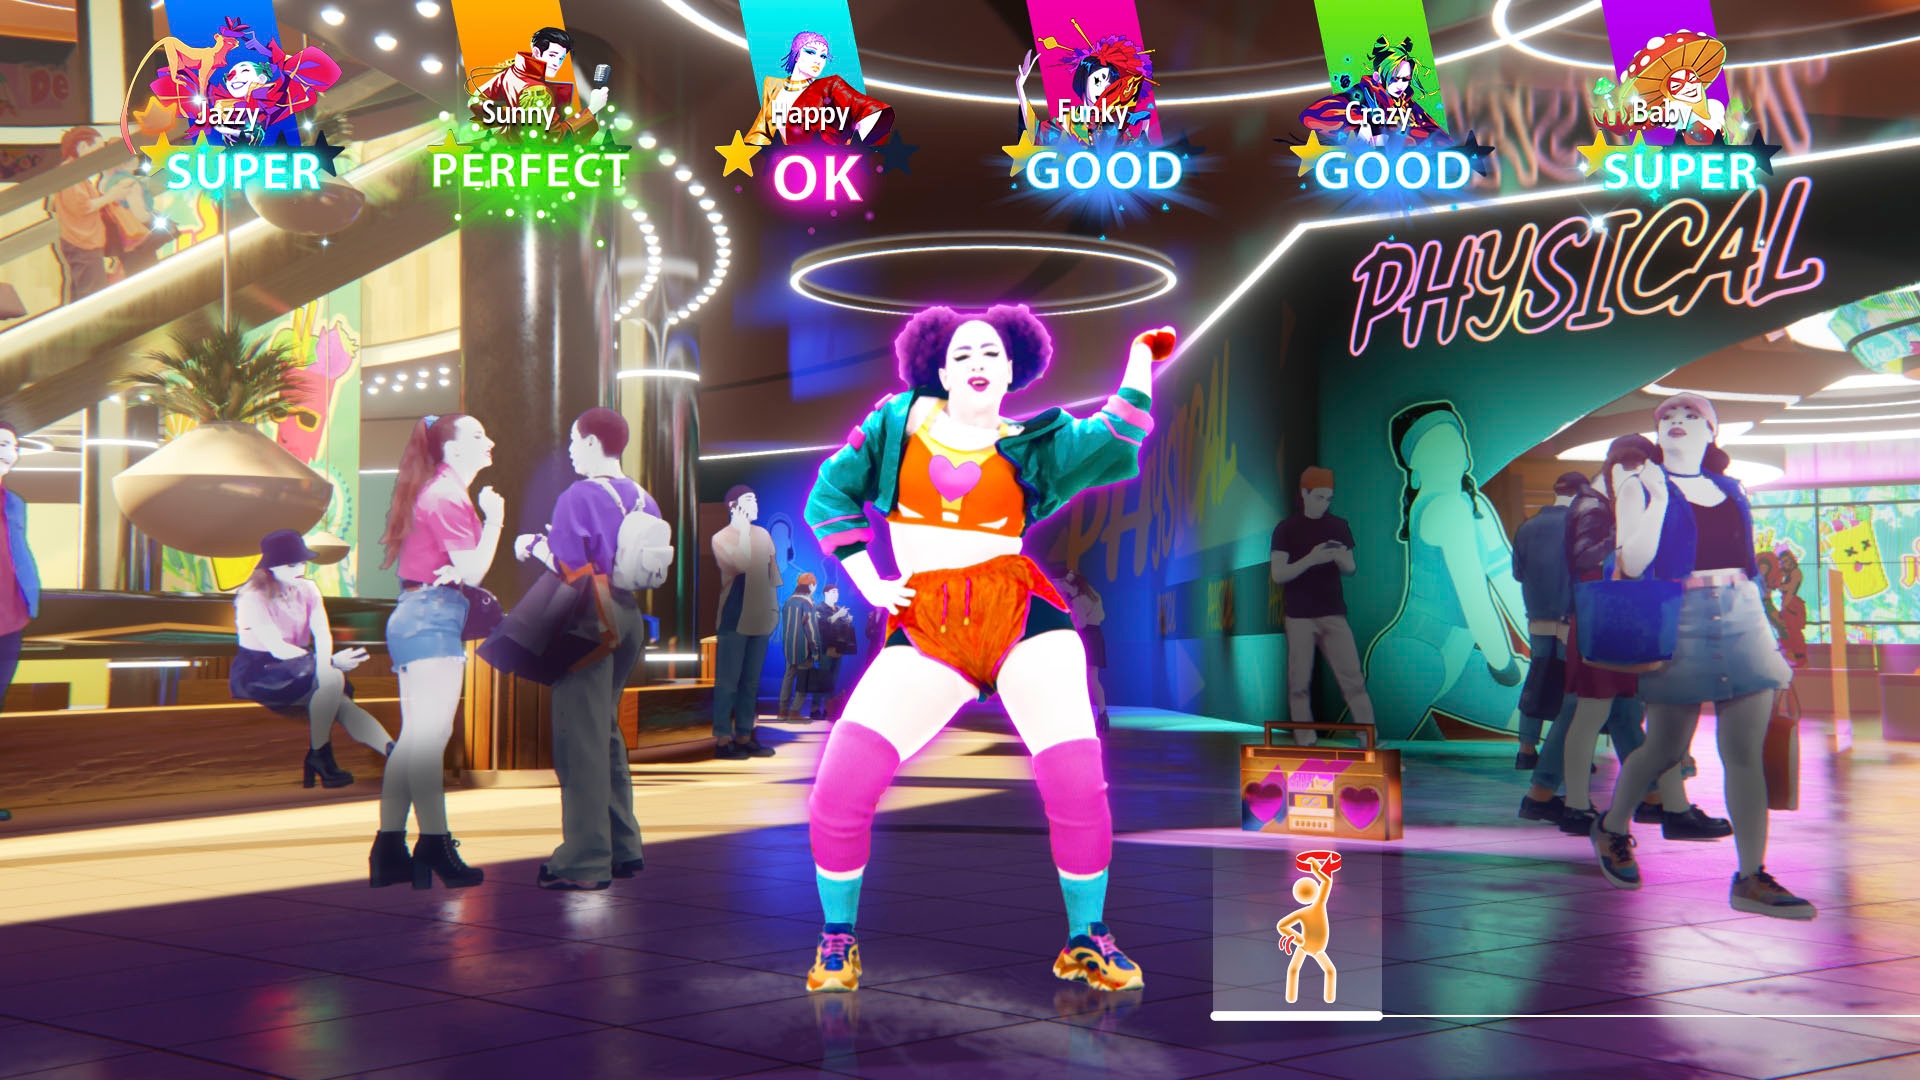 UBISOFT Spielesoftware »Just Dance 2023 Edition (Code in a box)«, Xbox Series X-Xbox Series X